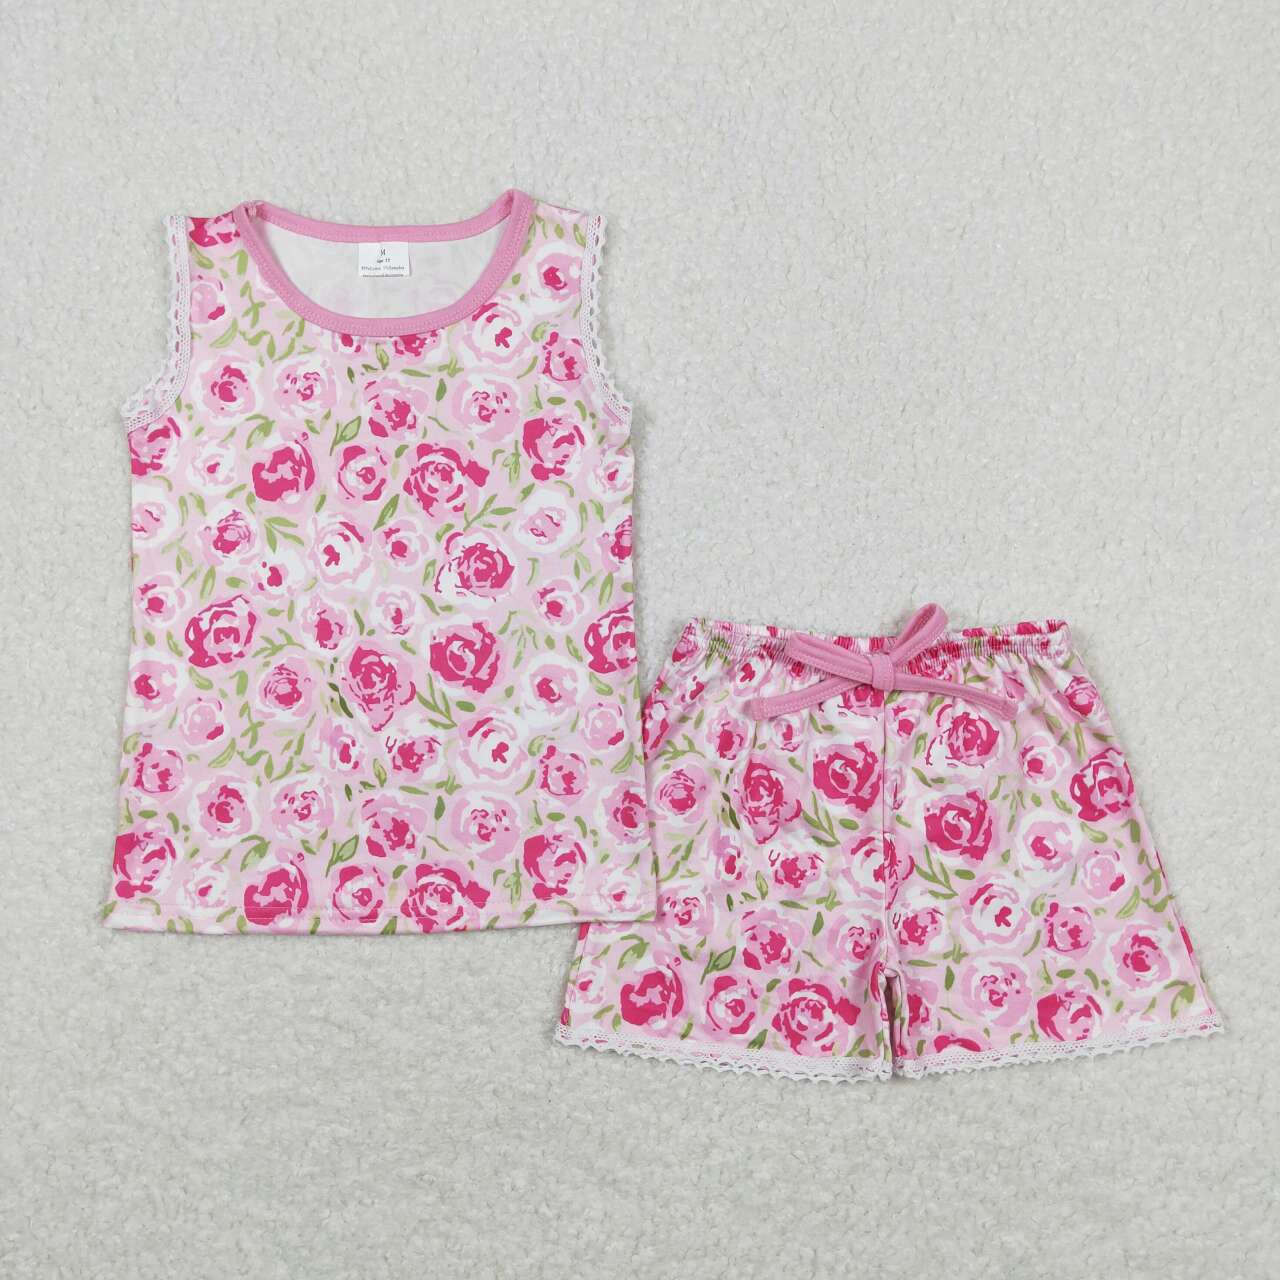 Flowers Print Girls Summer Clothes Set Sisters Wear